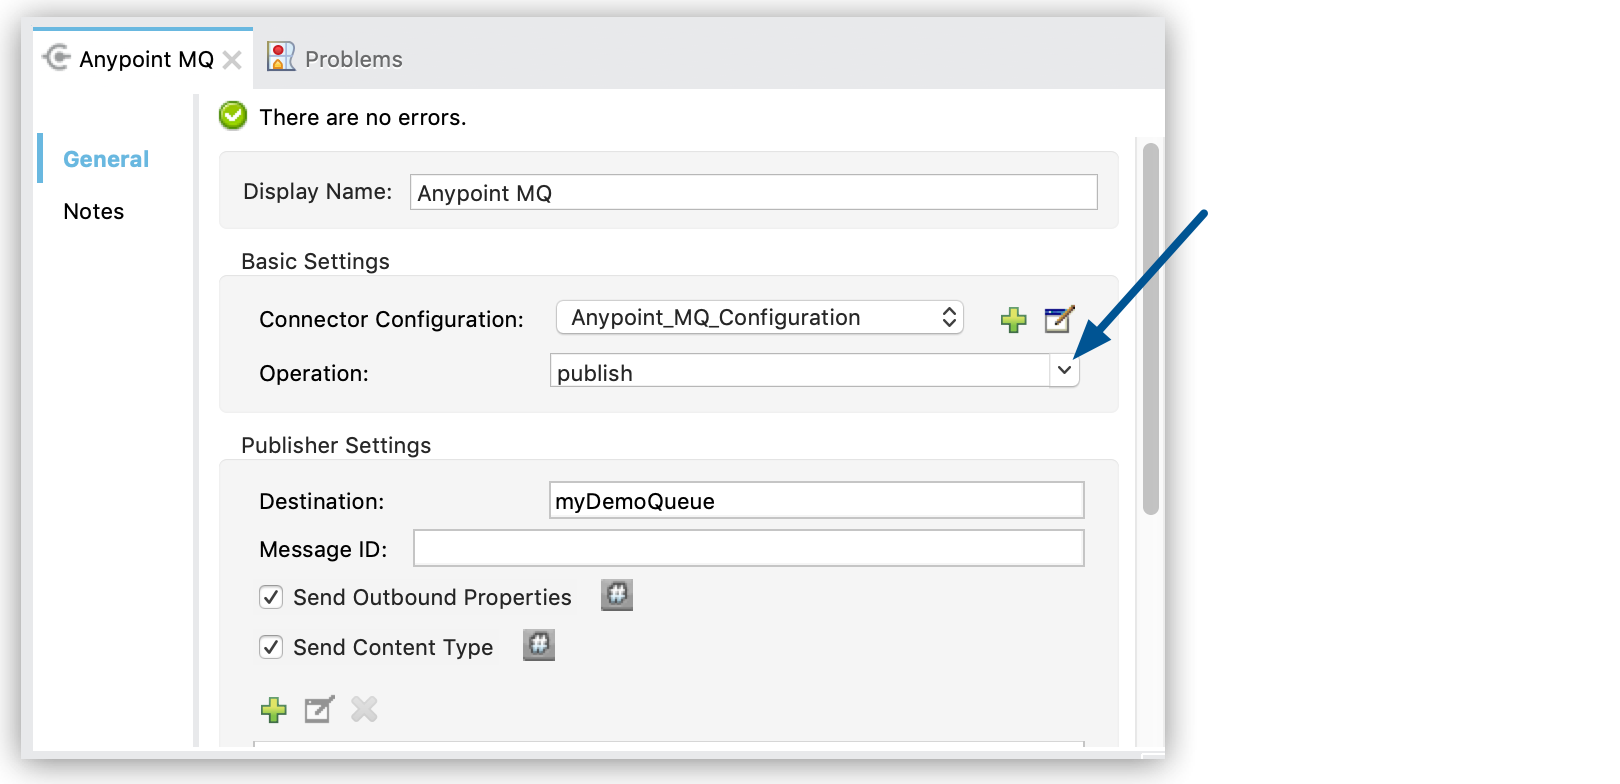 Operation and Destination fields in the Anypoint MQ properties window